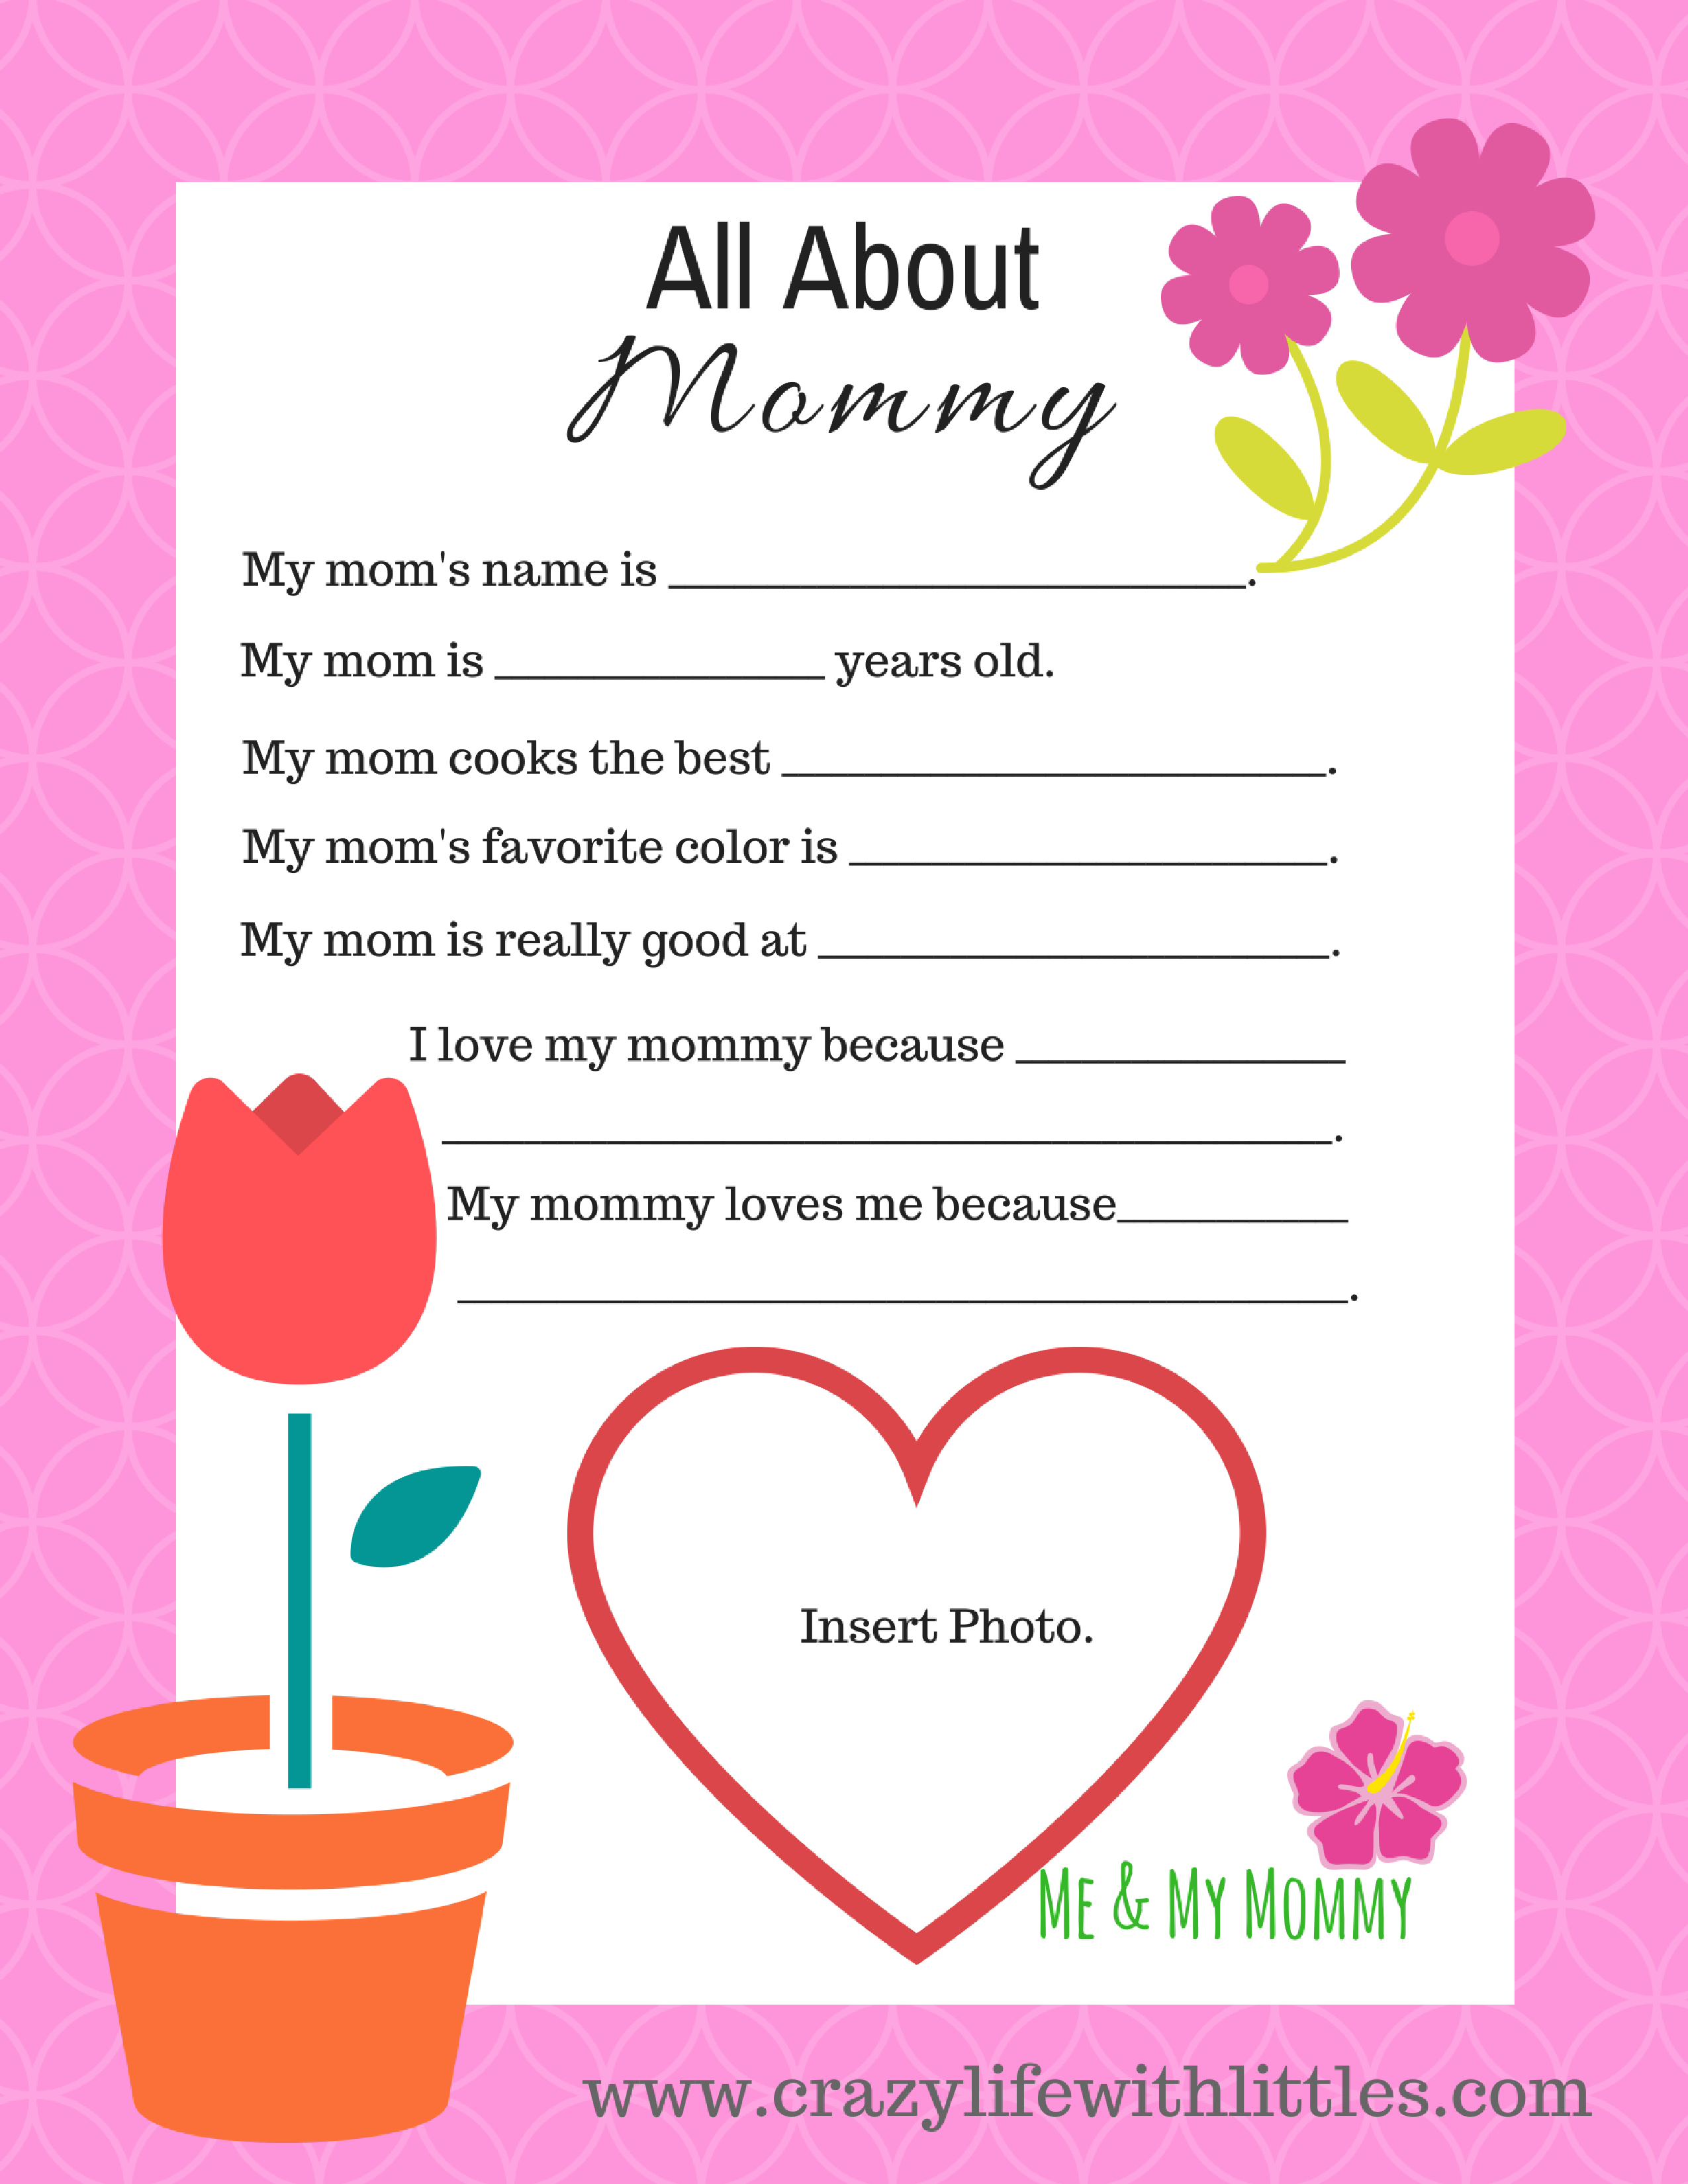 FREE MOTHER S DAY PRINTABLE FROM TODDLERS Crazy Life with Littles